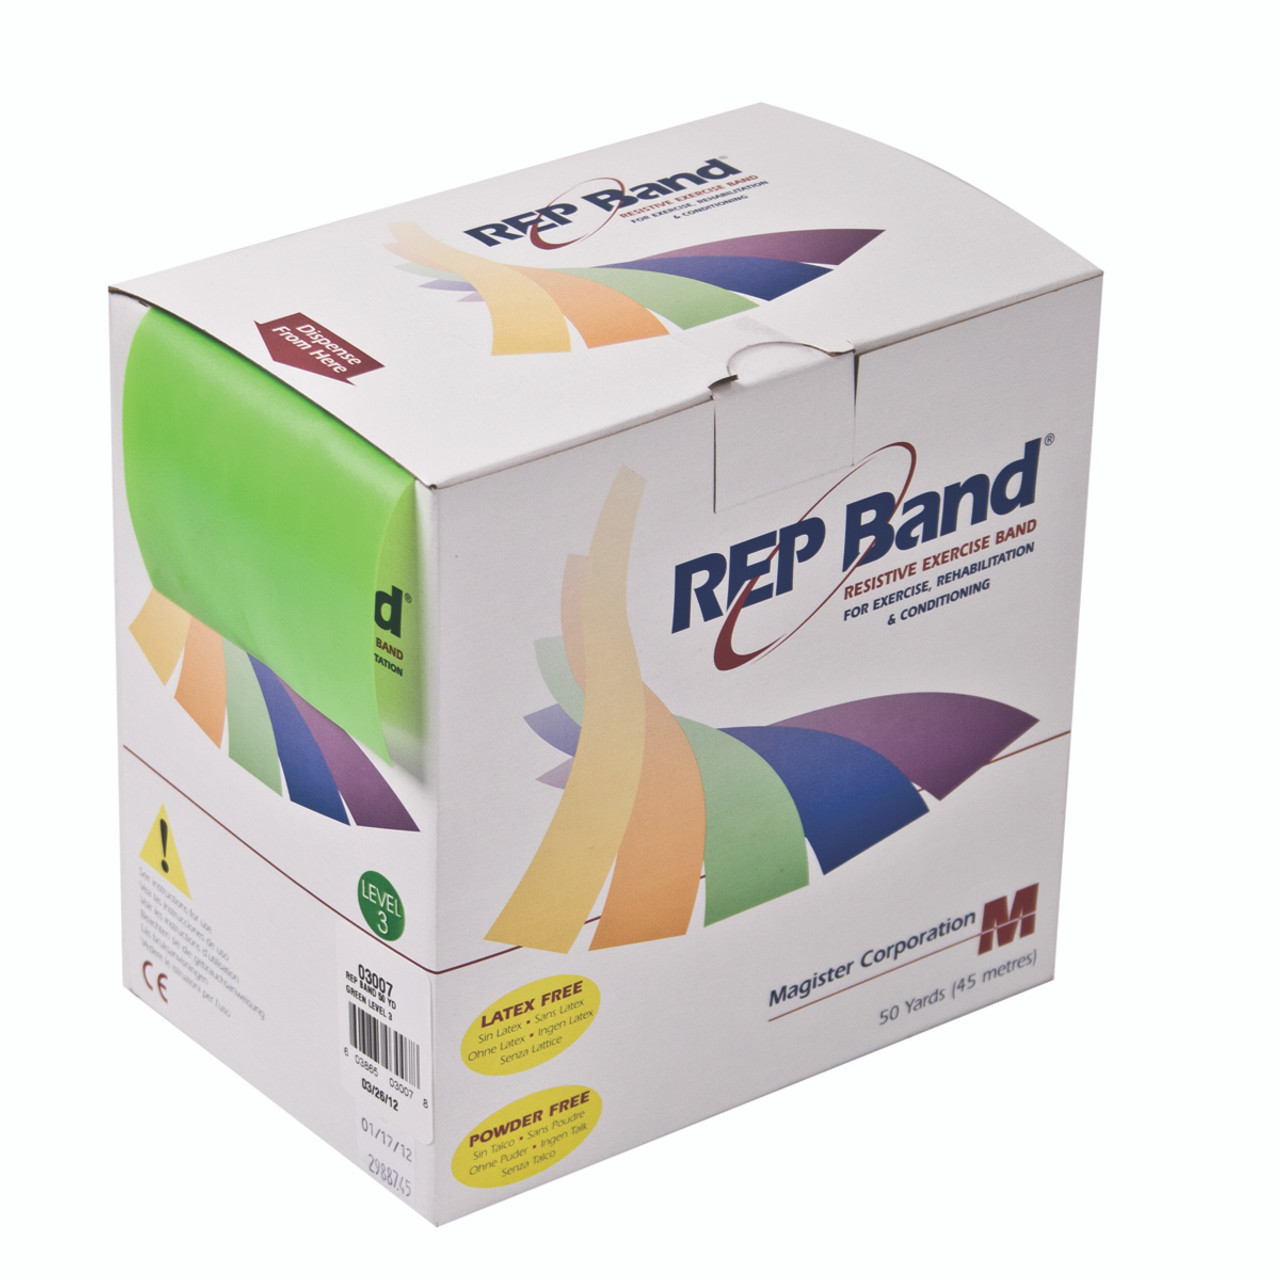 REP Band¨ exercise band - latex free - 50 yard - lime, level 3